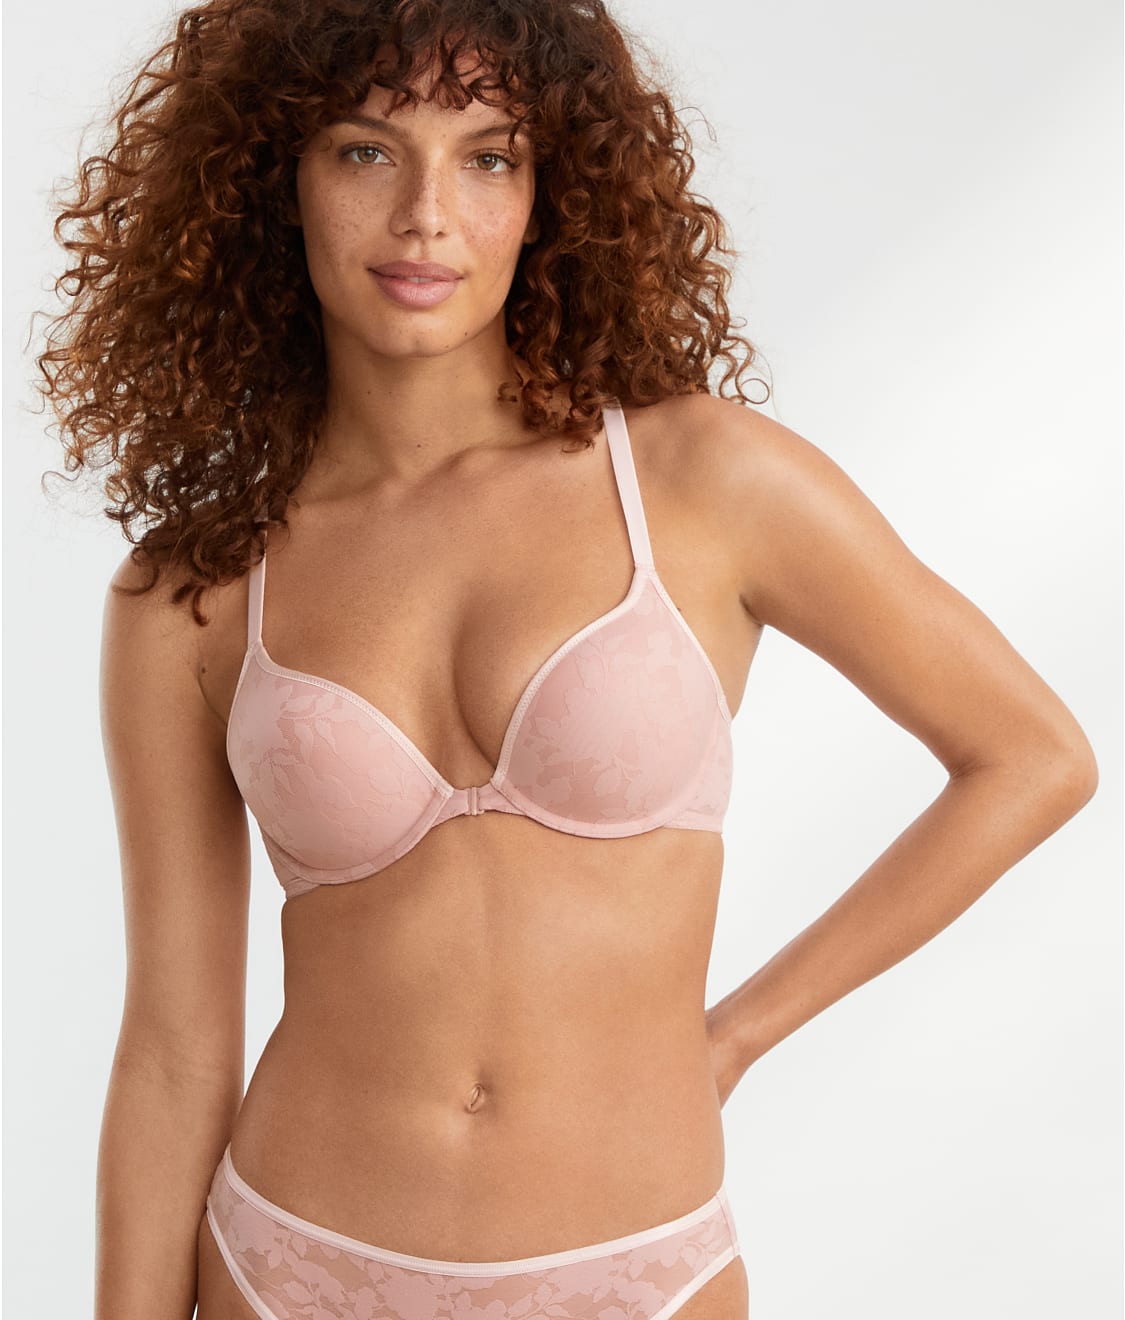 CURVY COUTURE Blushing Pink Luxe Lace Underwire Bra, US 36DD, UK